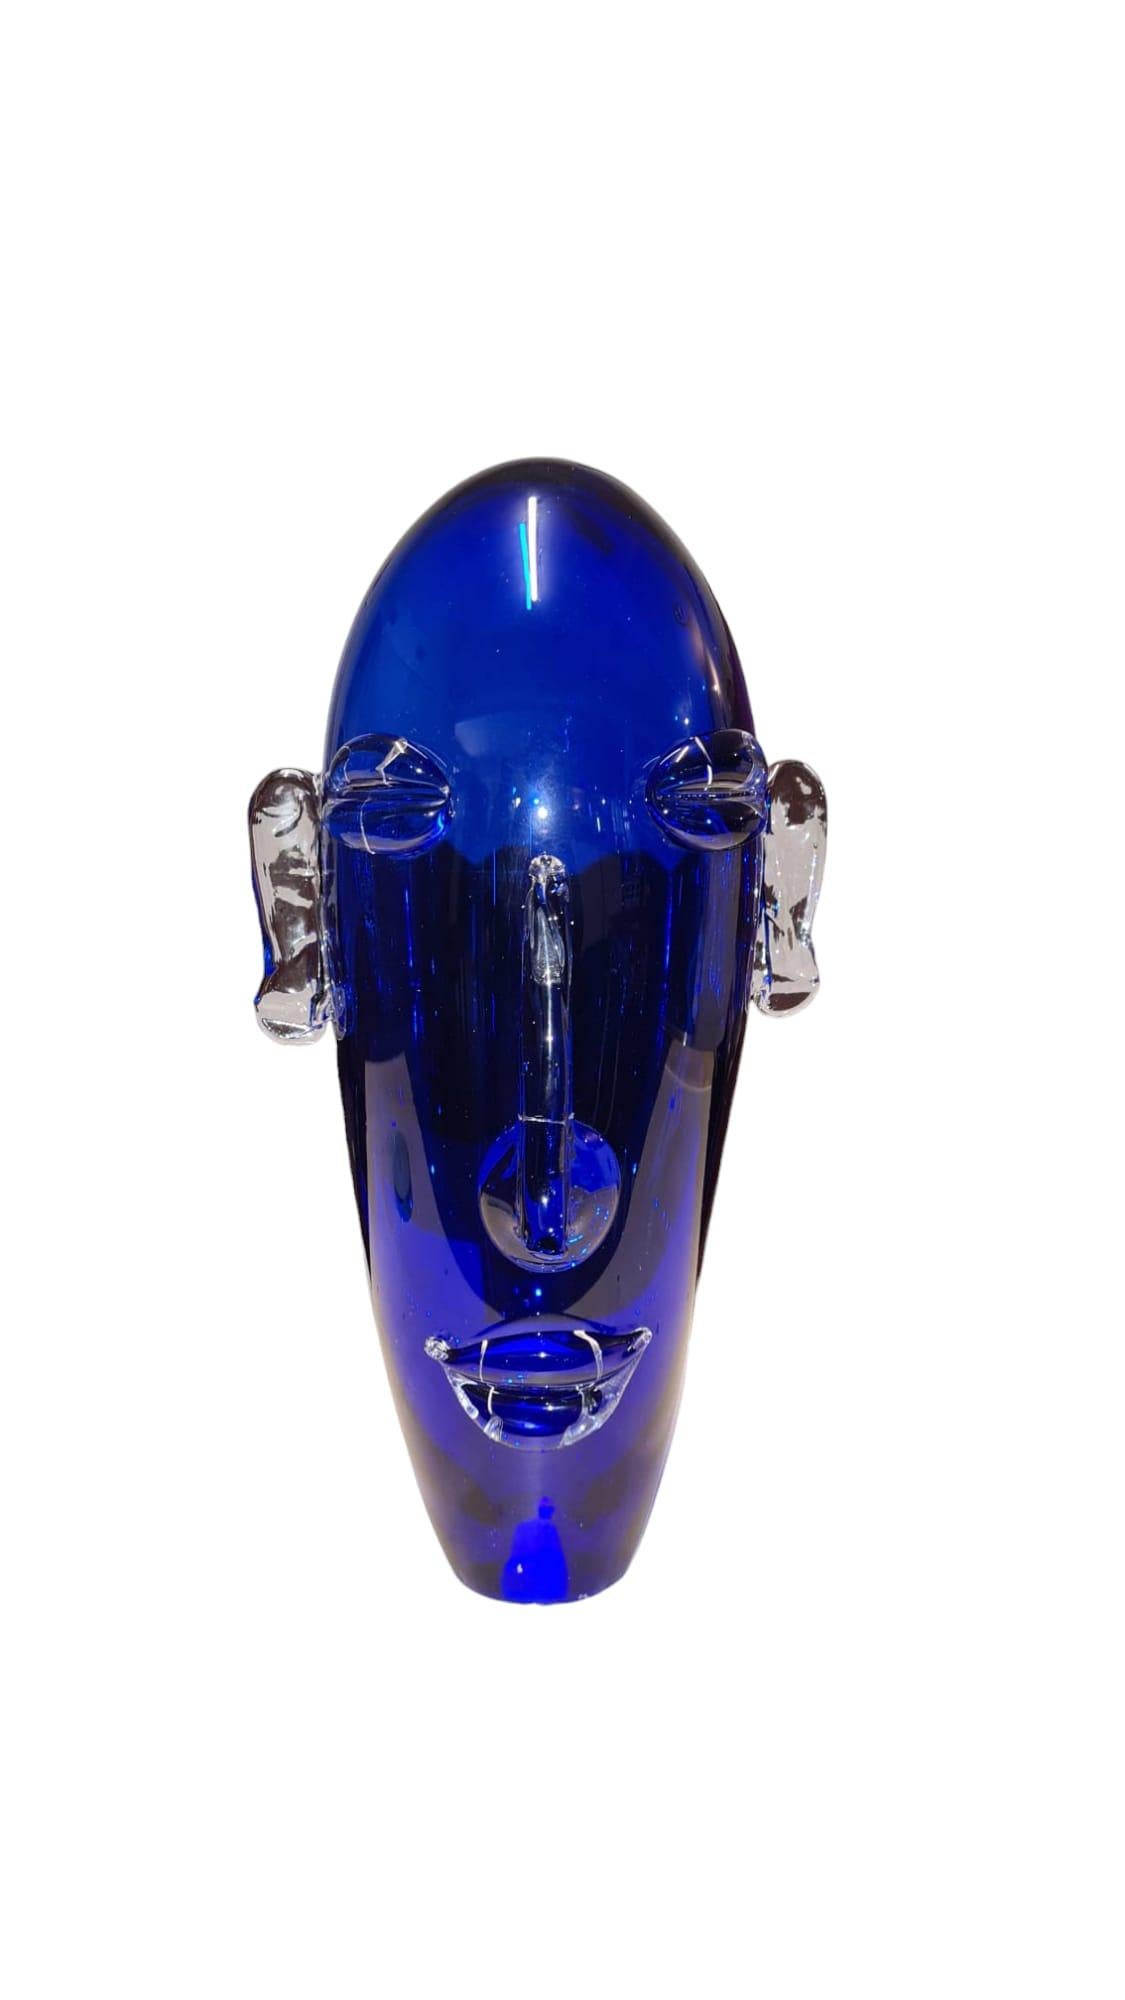 Hand-Crafted Head sculpture in sapphire blue Murano blown glass, decorative object available For Sale